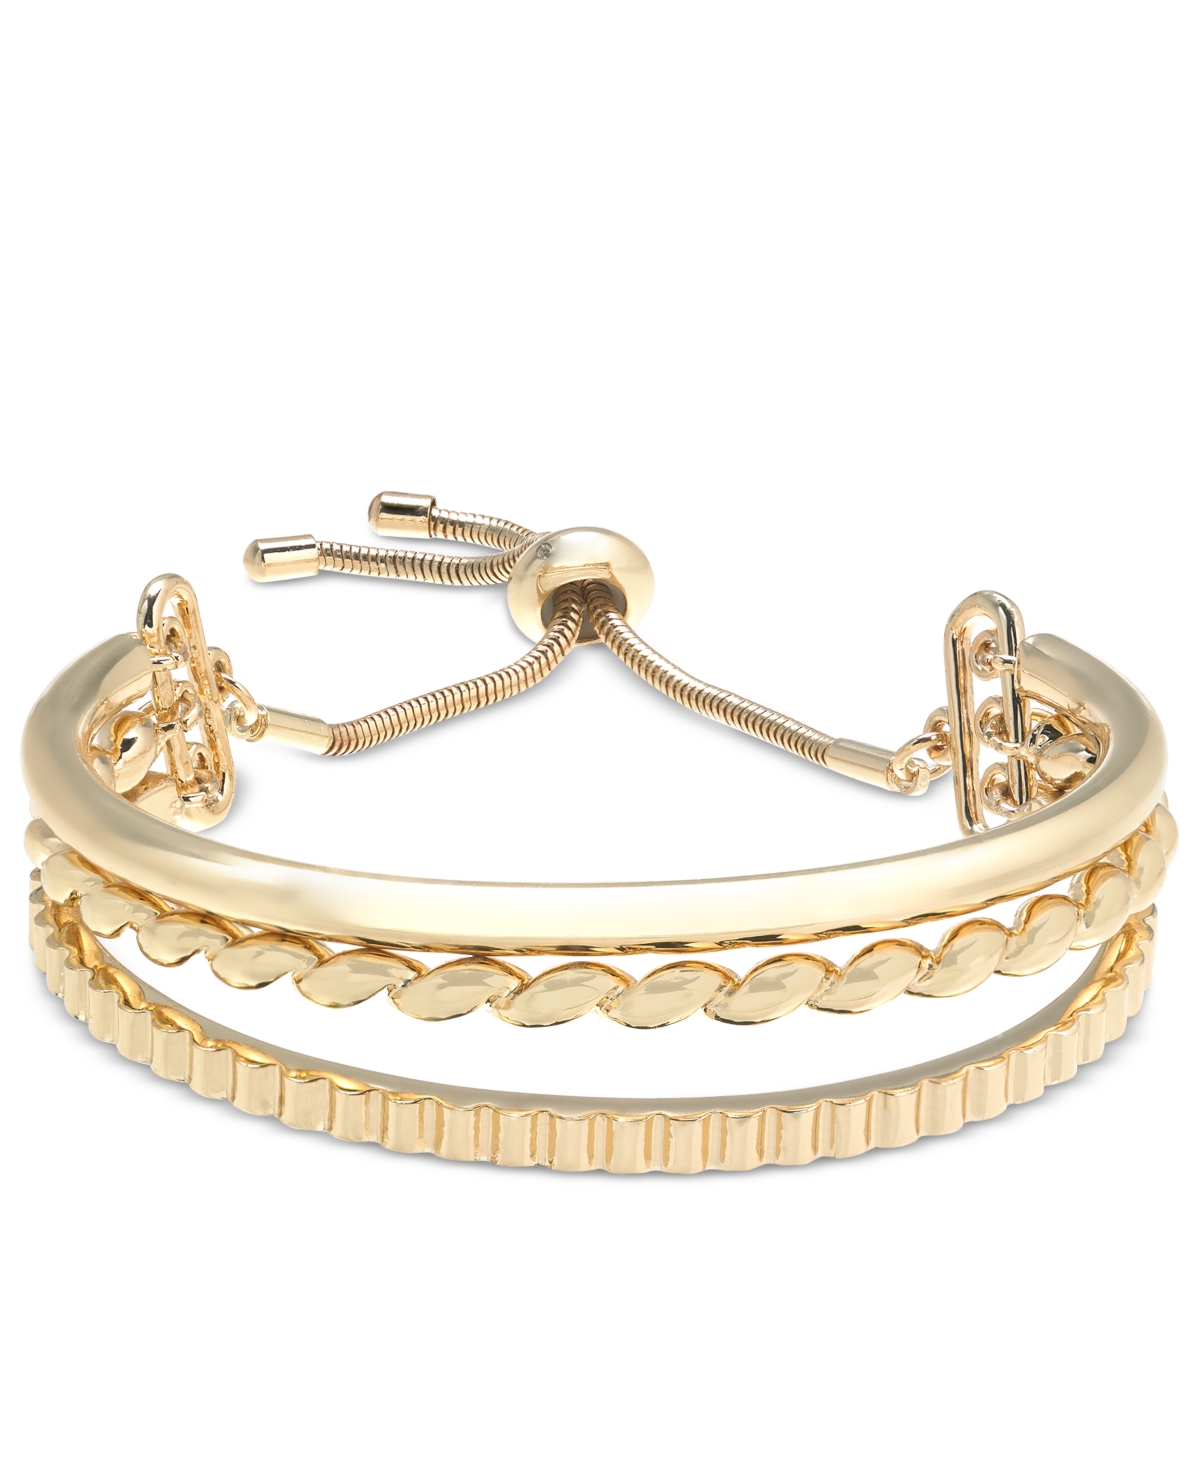 Gold-Tone Twisted Slider Bracelet, Created for Macy's - Gold